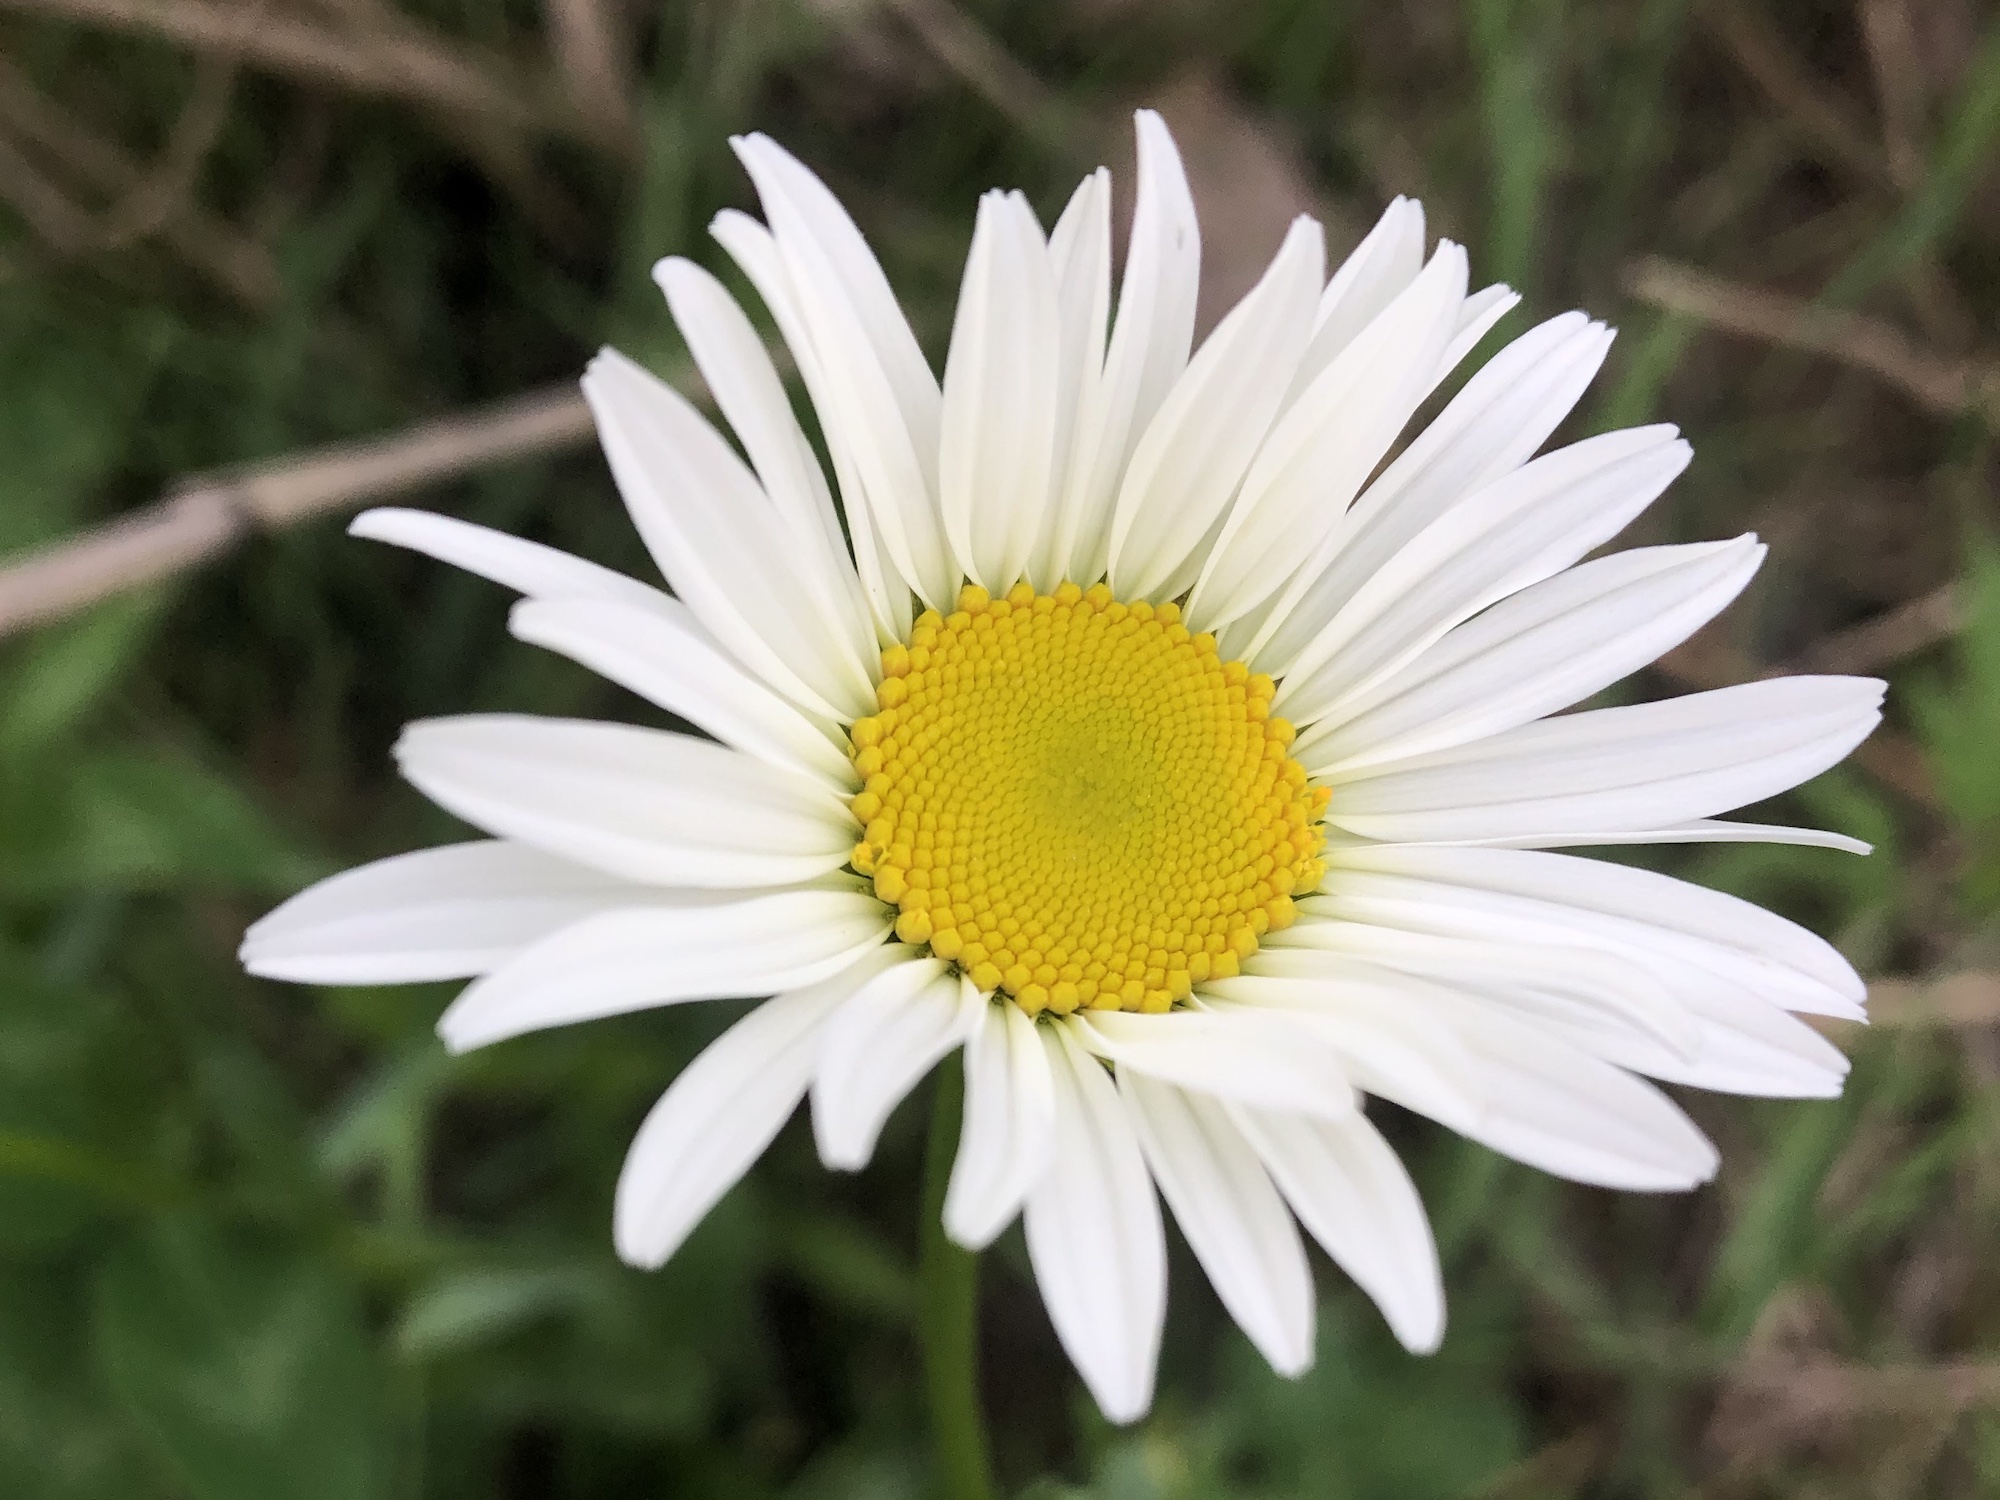 Ox-eye Daisy on bank of retaining pond in Madison, Wisconsin on June 1, 2020.